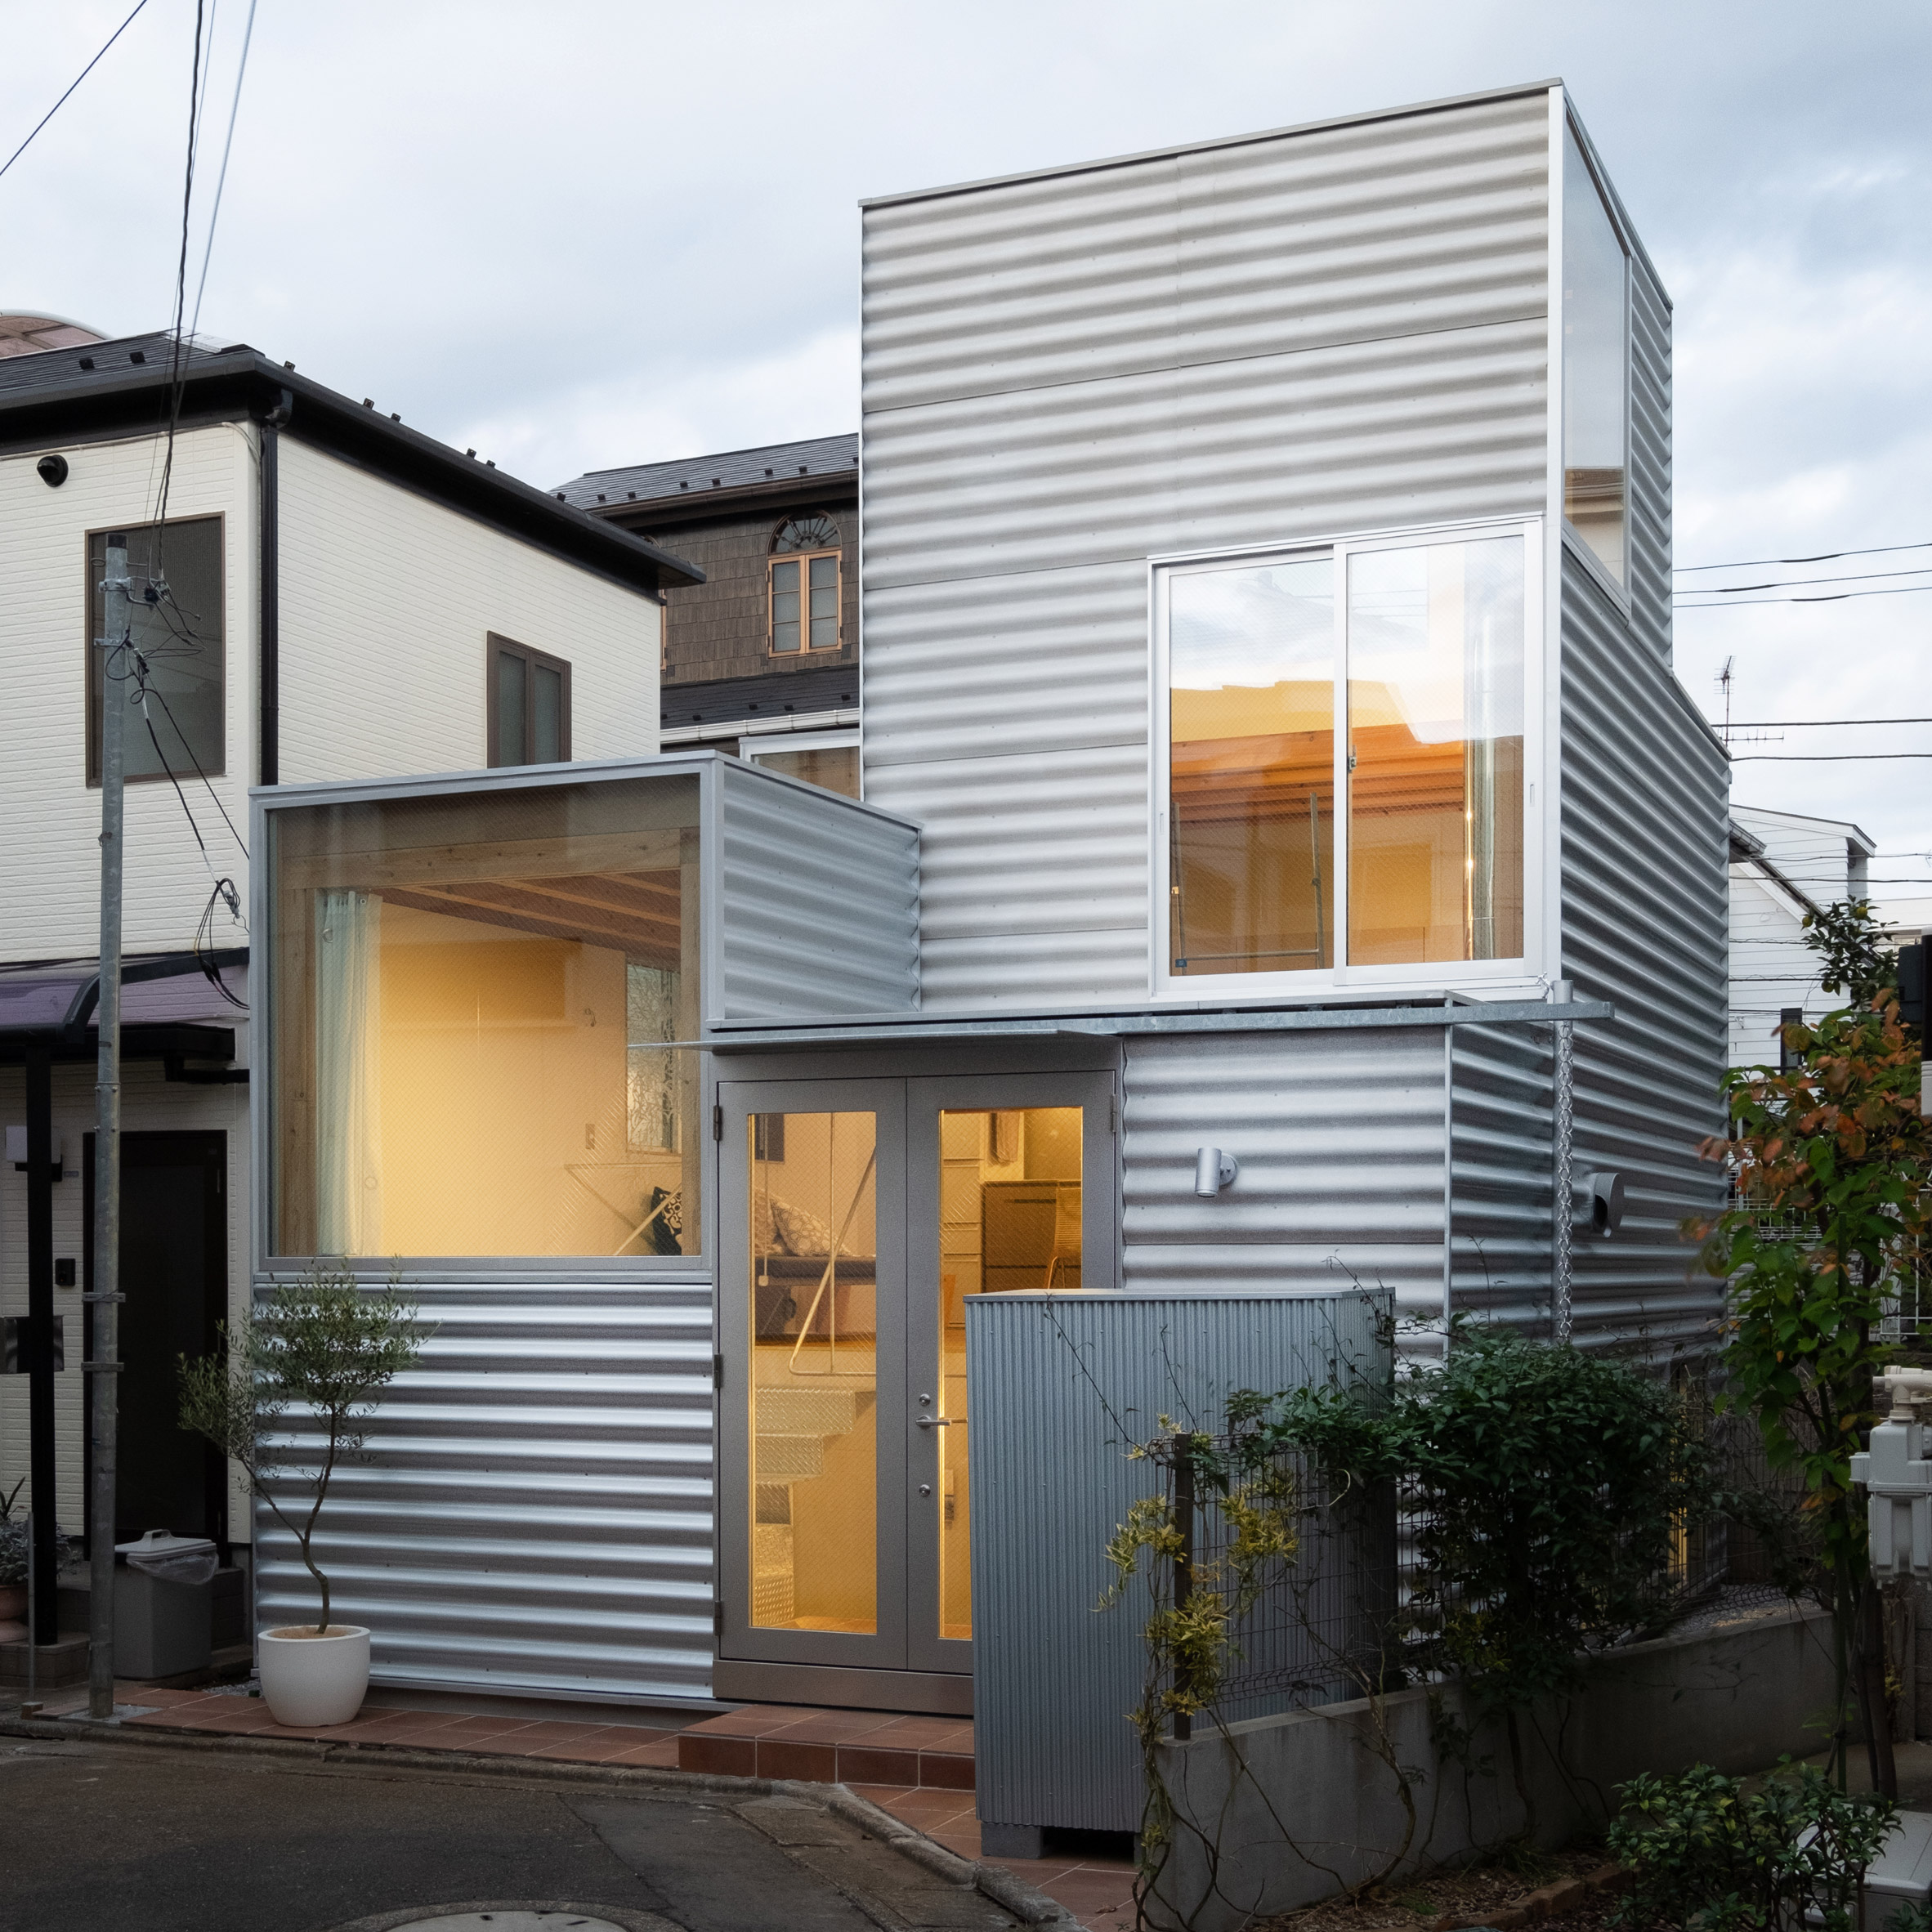 Small Tokyo house with corrugated iron facade